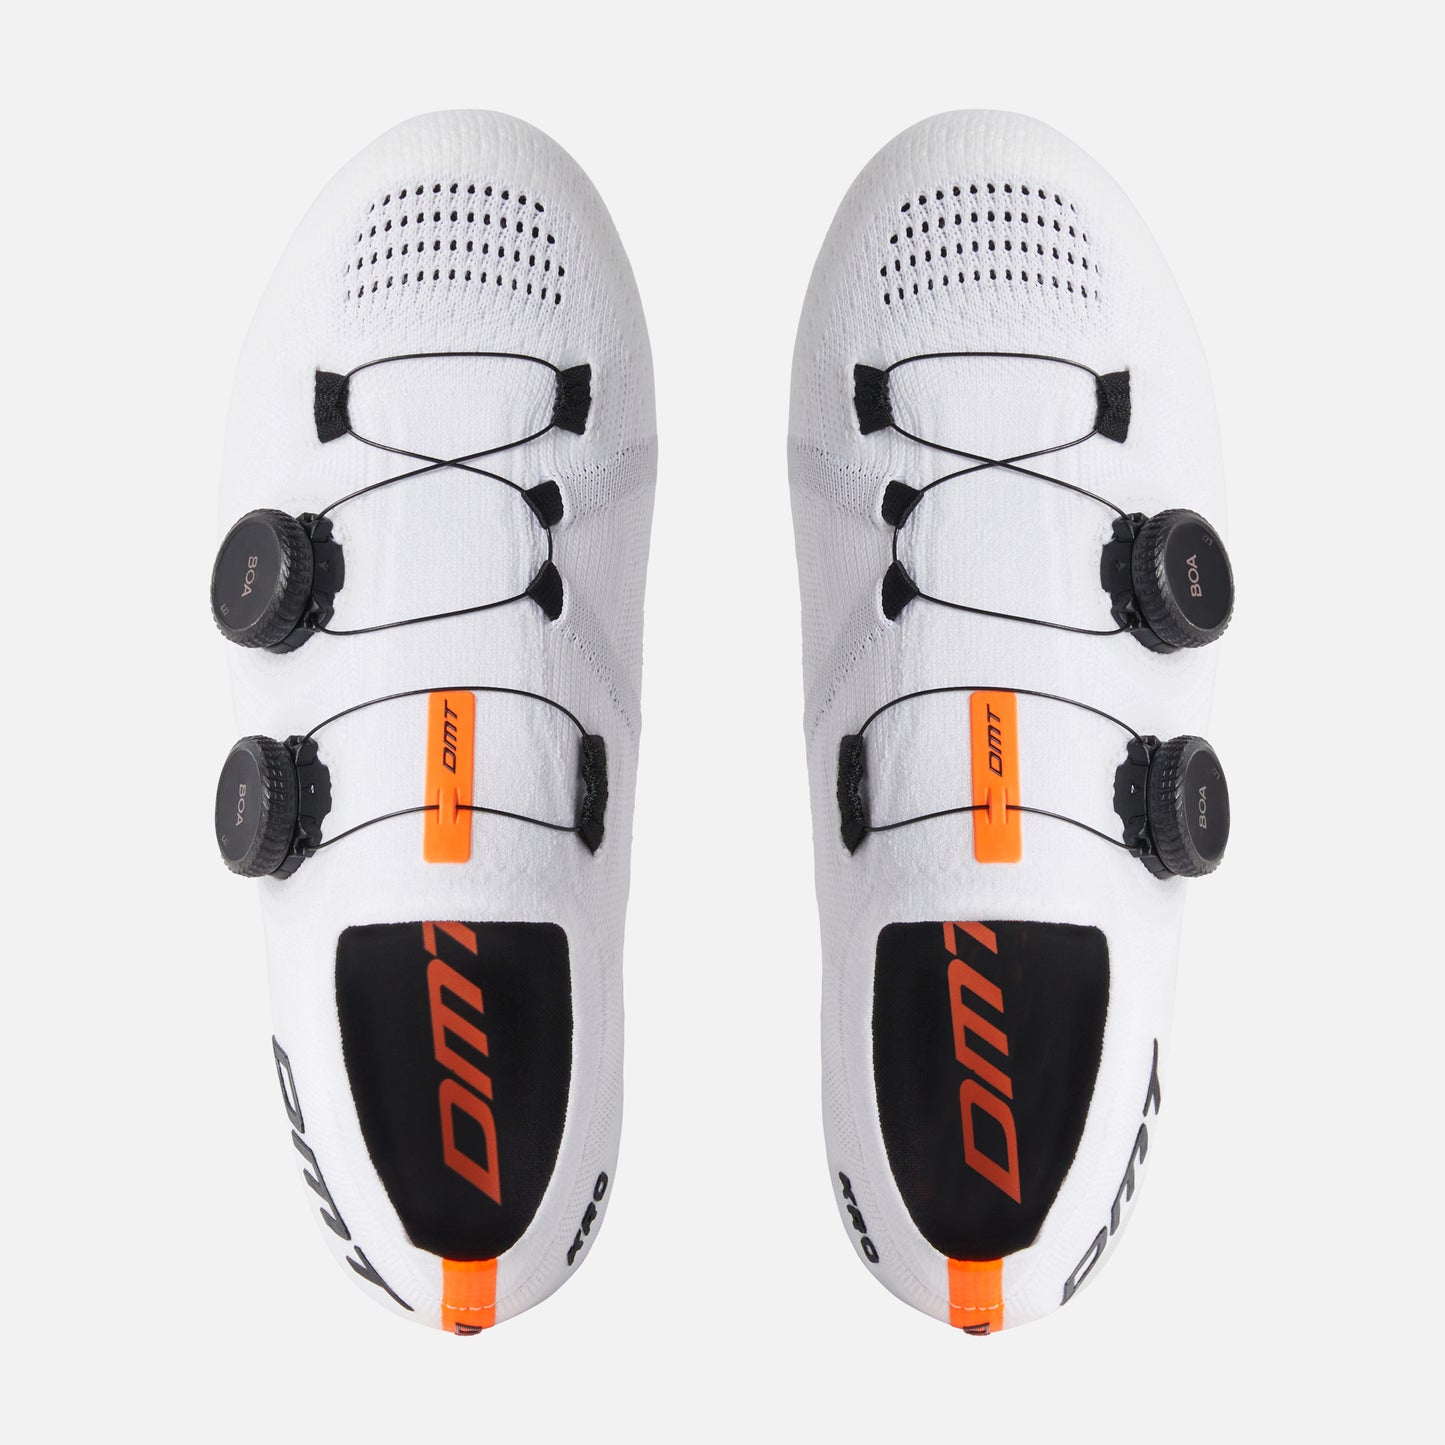 Road bike shoes for cycling, for men and women - DMT Cycling